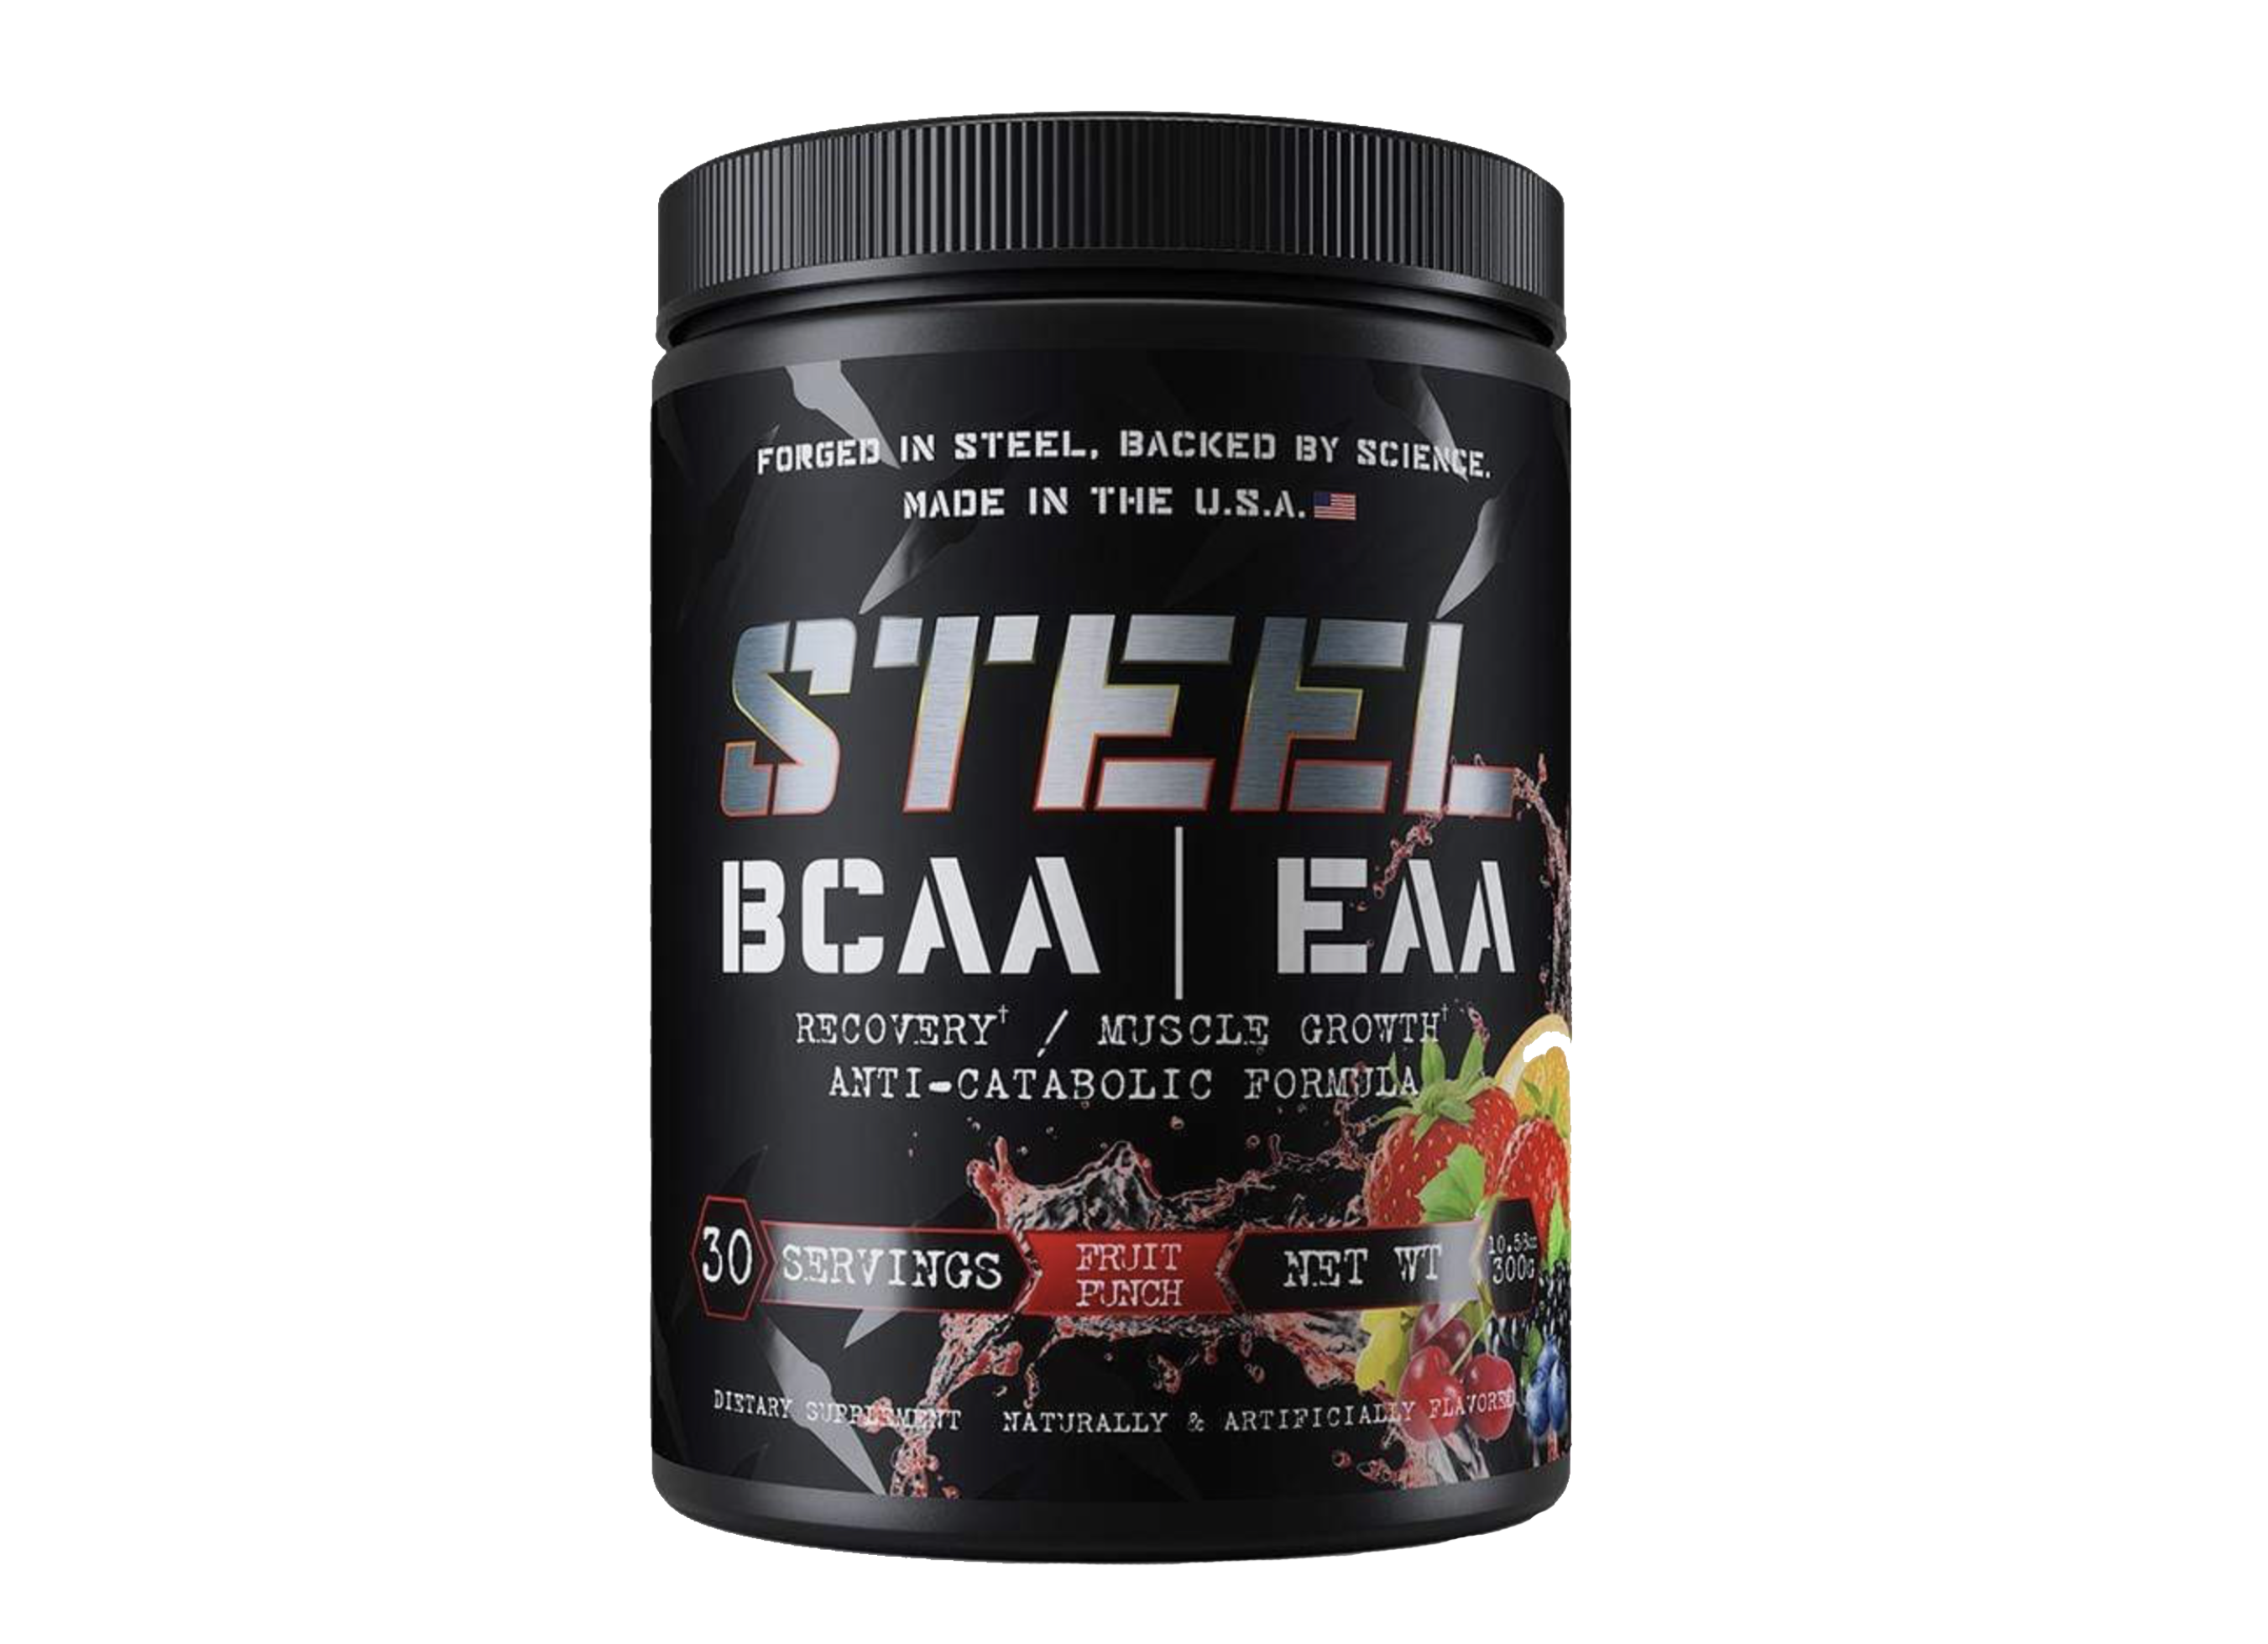 Steel Supplements BCAAS|EAAS – Amino Acids – Professional Supplements & Protein From A-list Nutrition